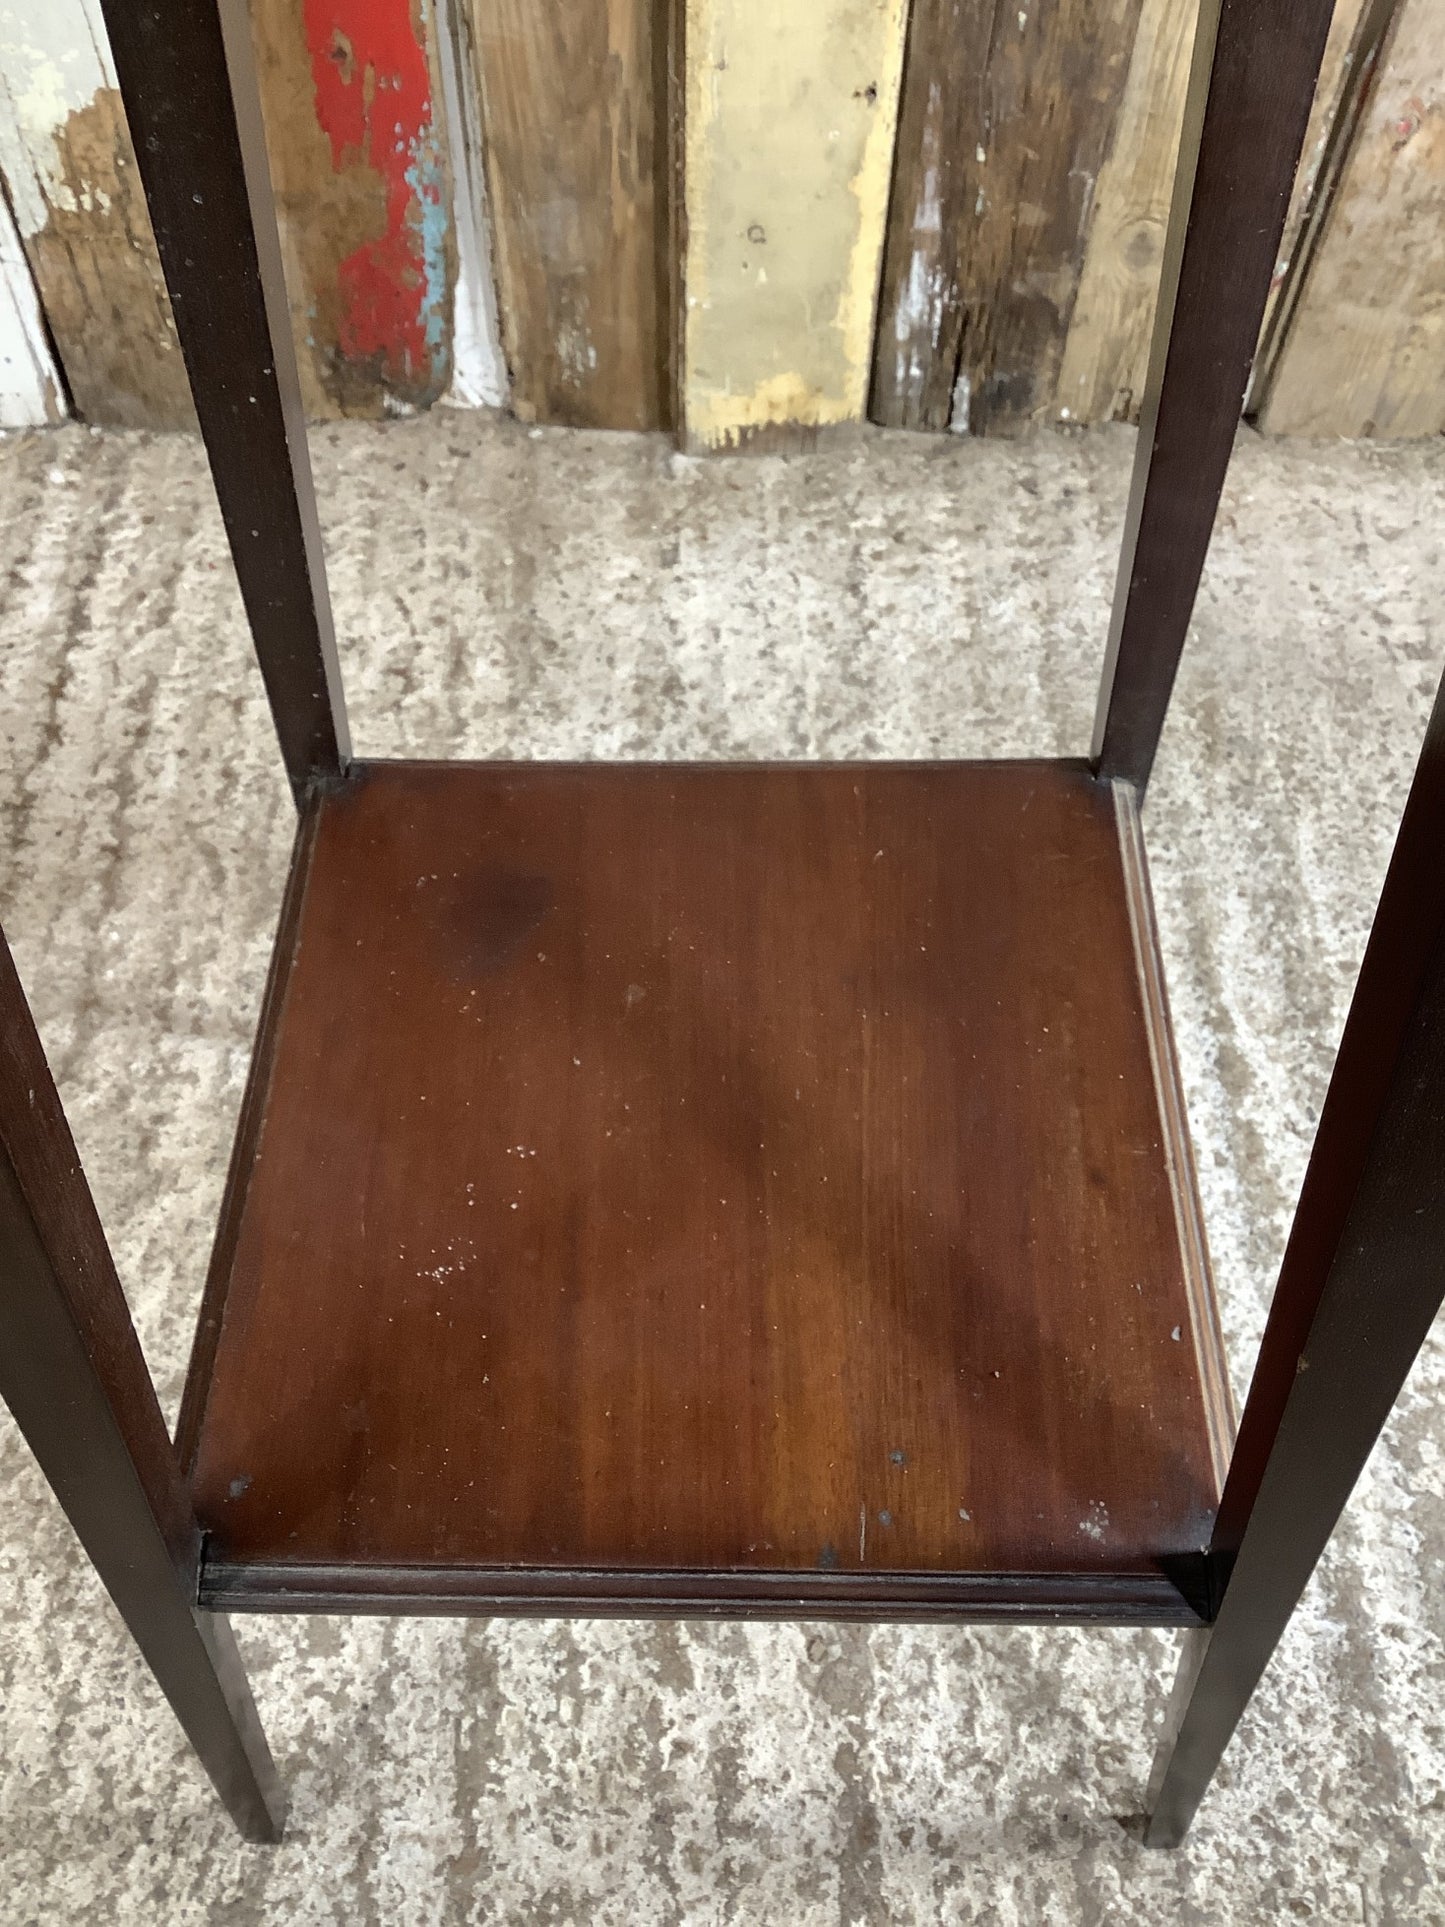 Lovely 1930’s Style 17” Square Mahogany Two Tier Side Table Plant Stand 4 Legs